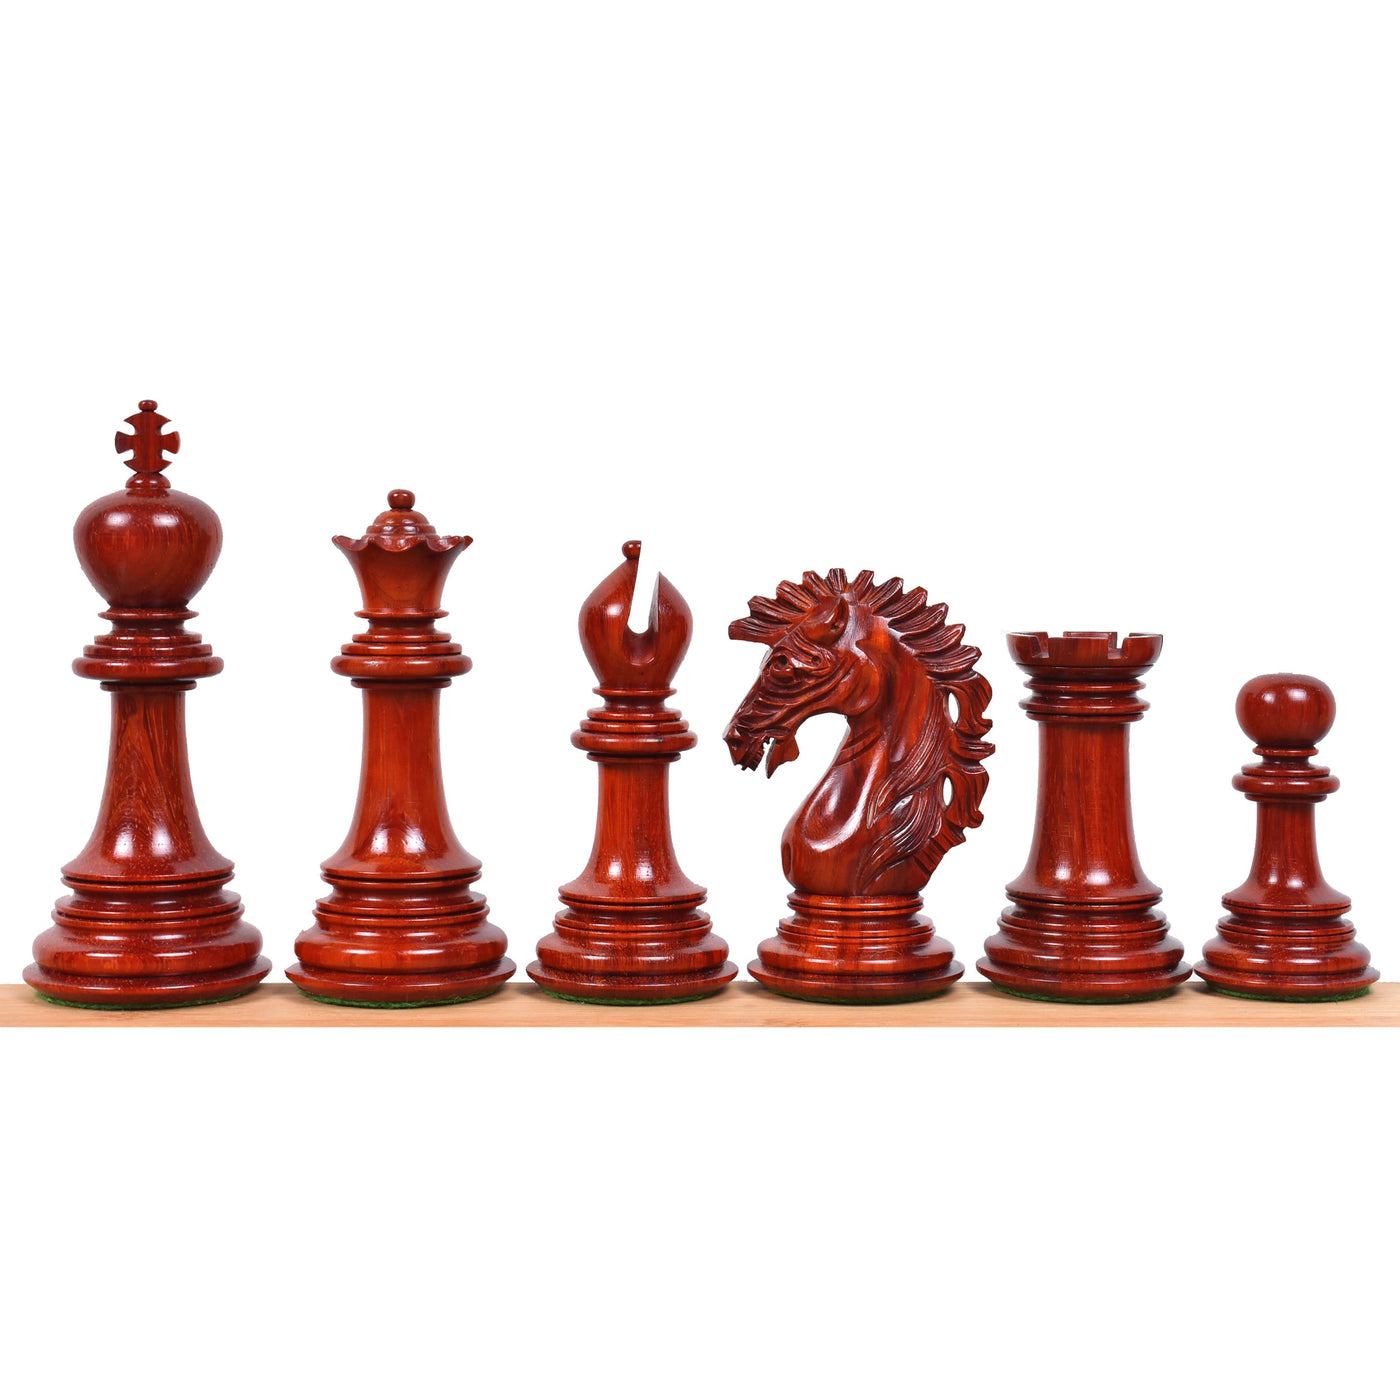 4.6" Mogul Staunton Luxury Bud Rose Wood Chess Pieces with 23" Bud Rosewood & Maple Wood Signature Wooden Chessboard and Leatherette Coffer Storage Box